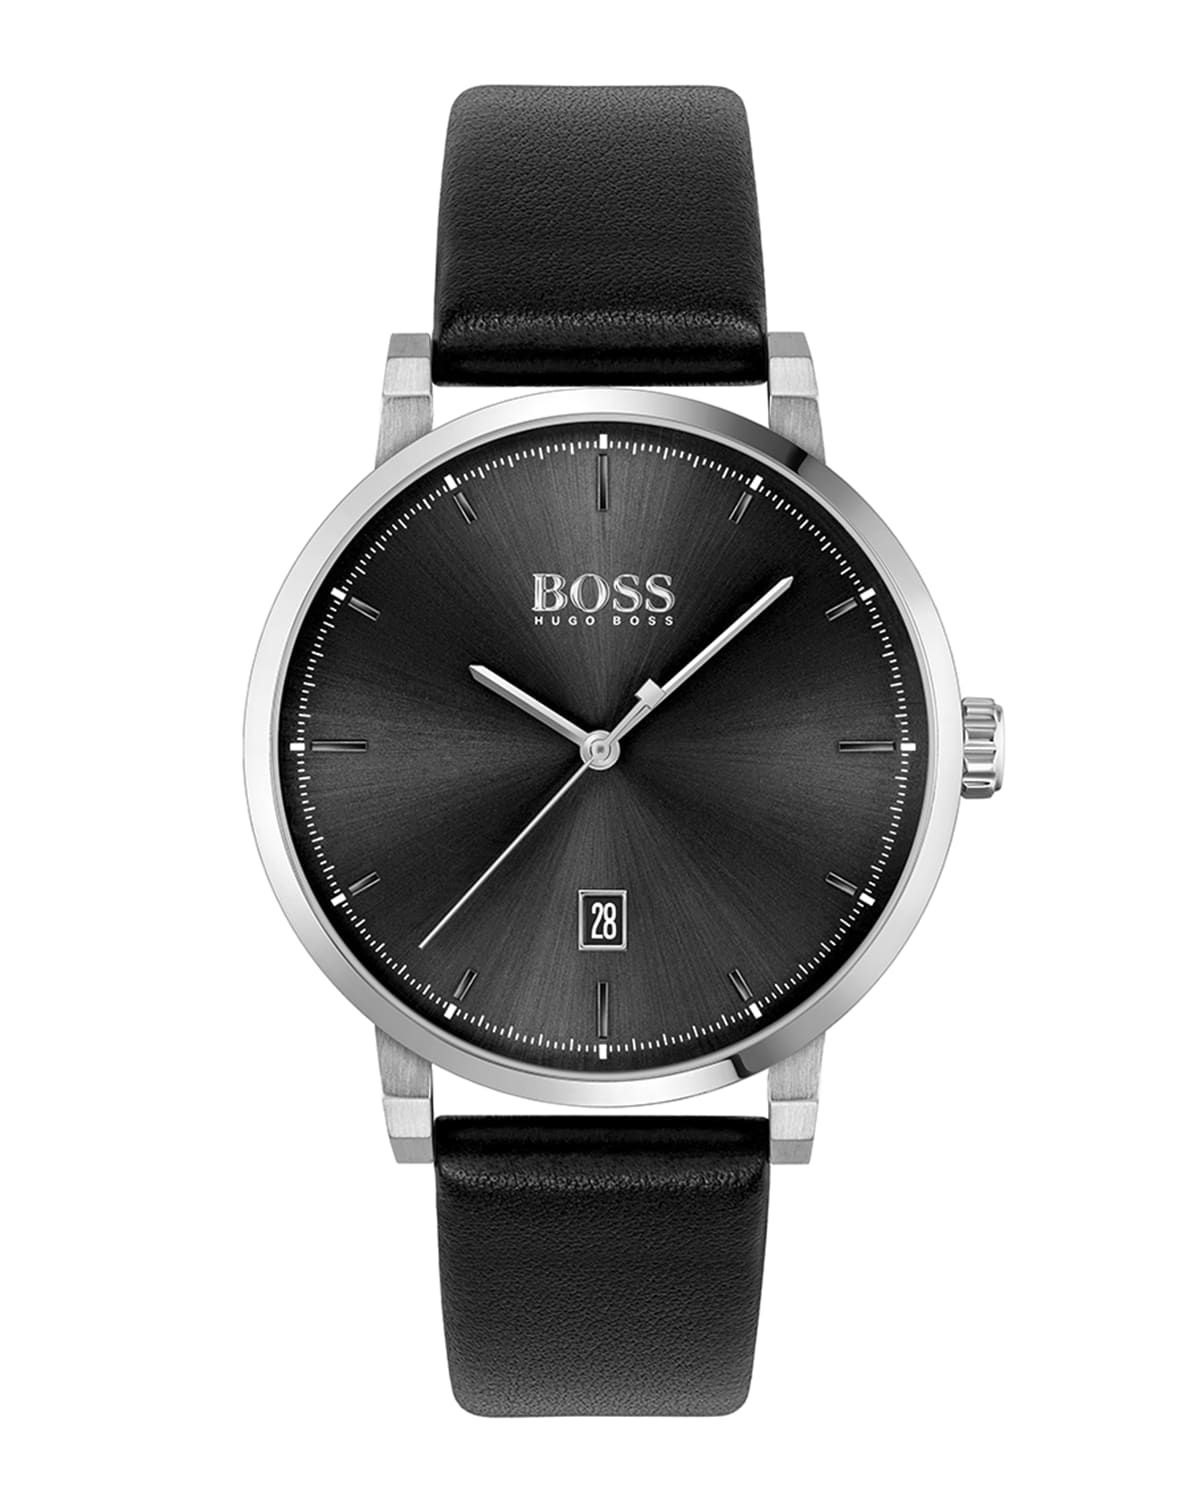 Movado Men's Boss Confidence 42mm Leather Watch